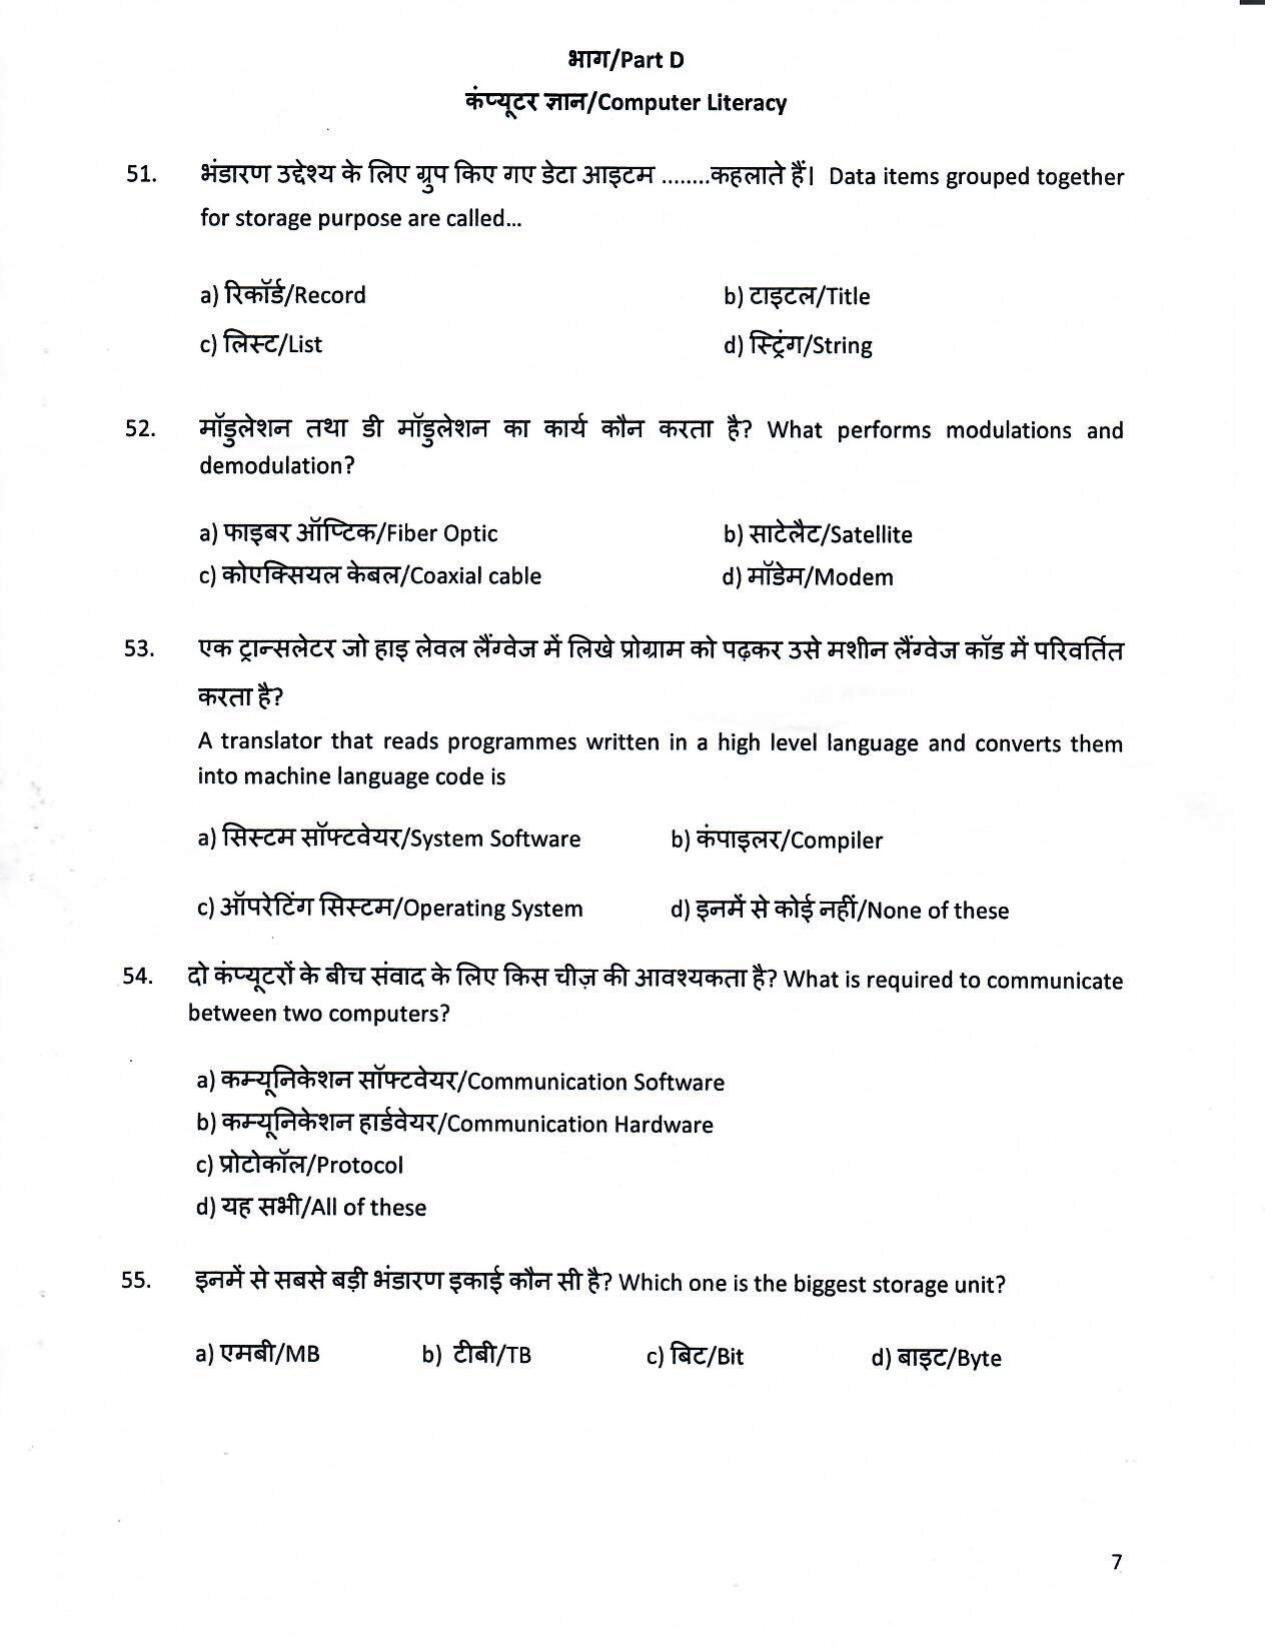 LPSC Hindi Typist 2020 Question Paper - Page 8